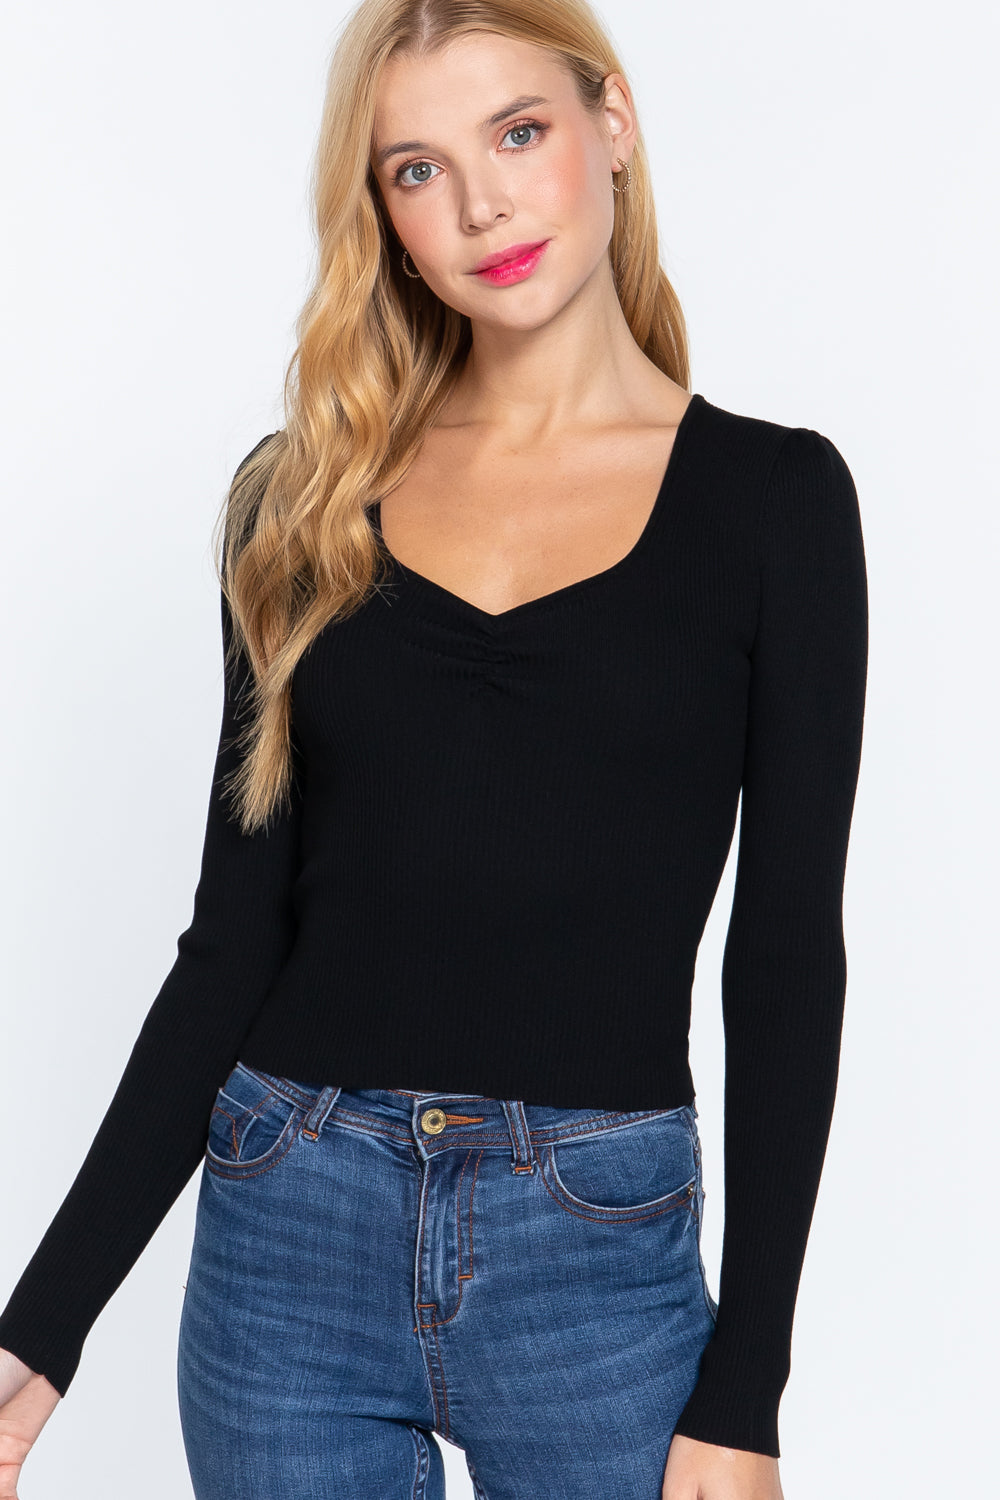 The802Gypsy  shirts and tops Black / S ❤GYPSY LOVE-Shirring Sweatheart Neck Sweater Top